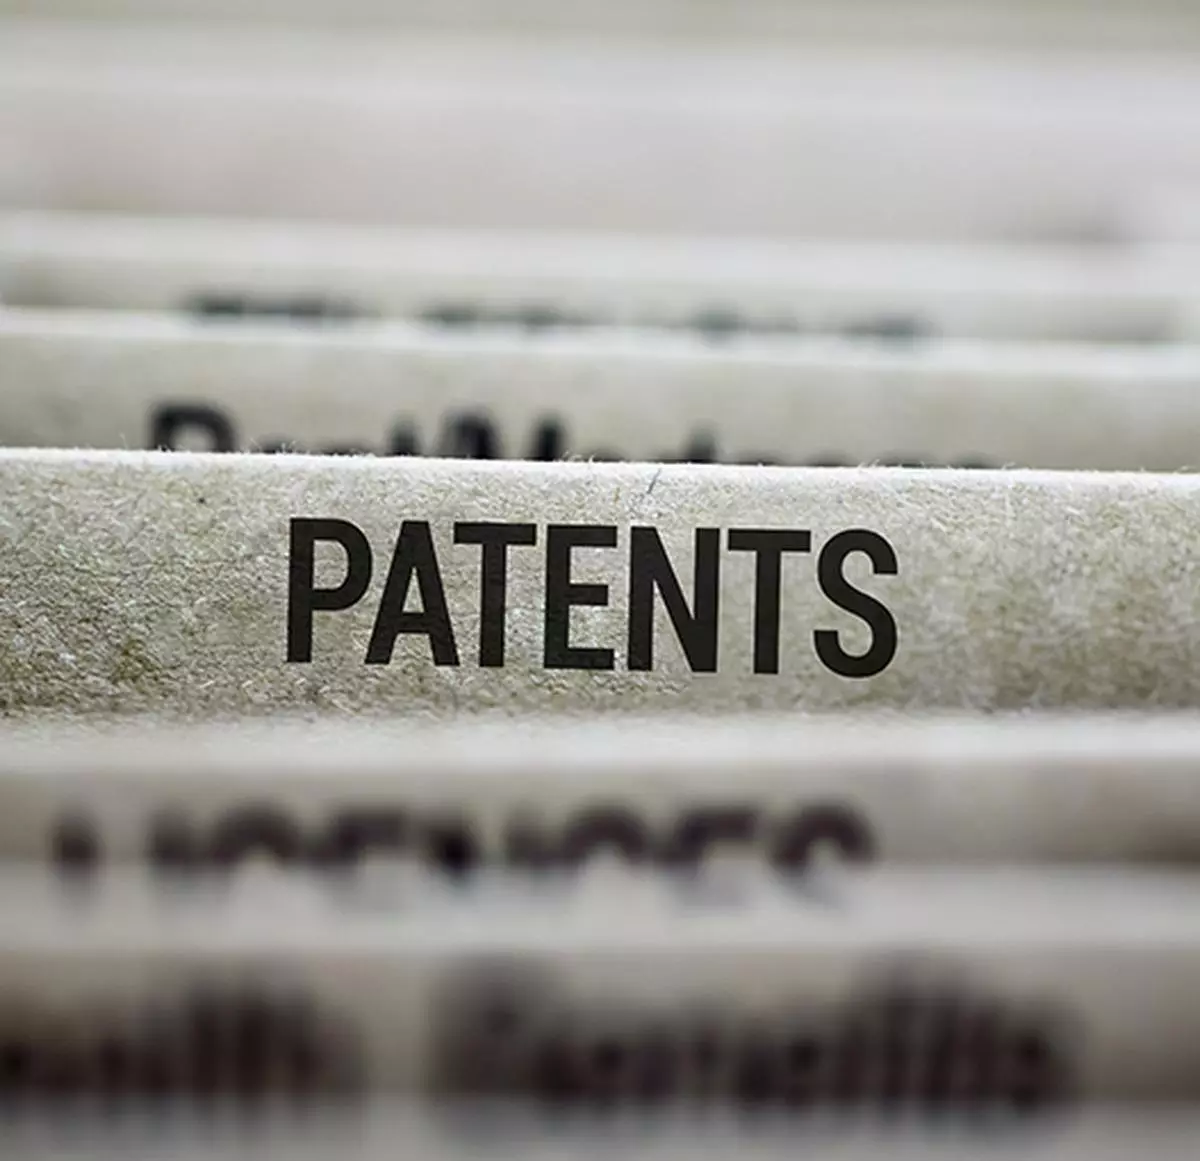 Patents Office in India is woefully understaffed